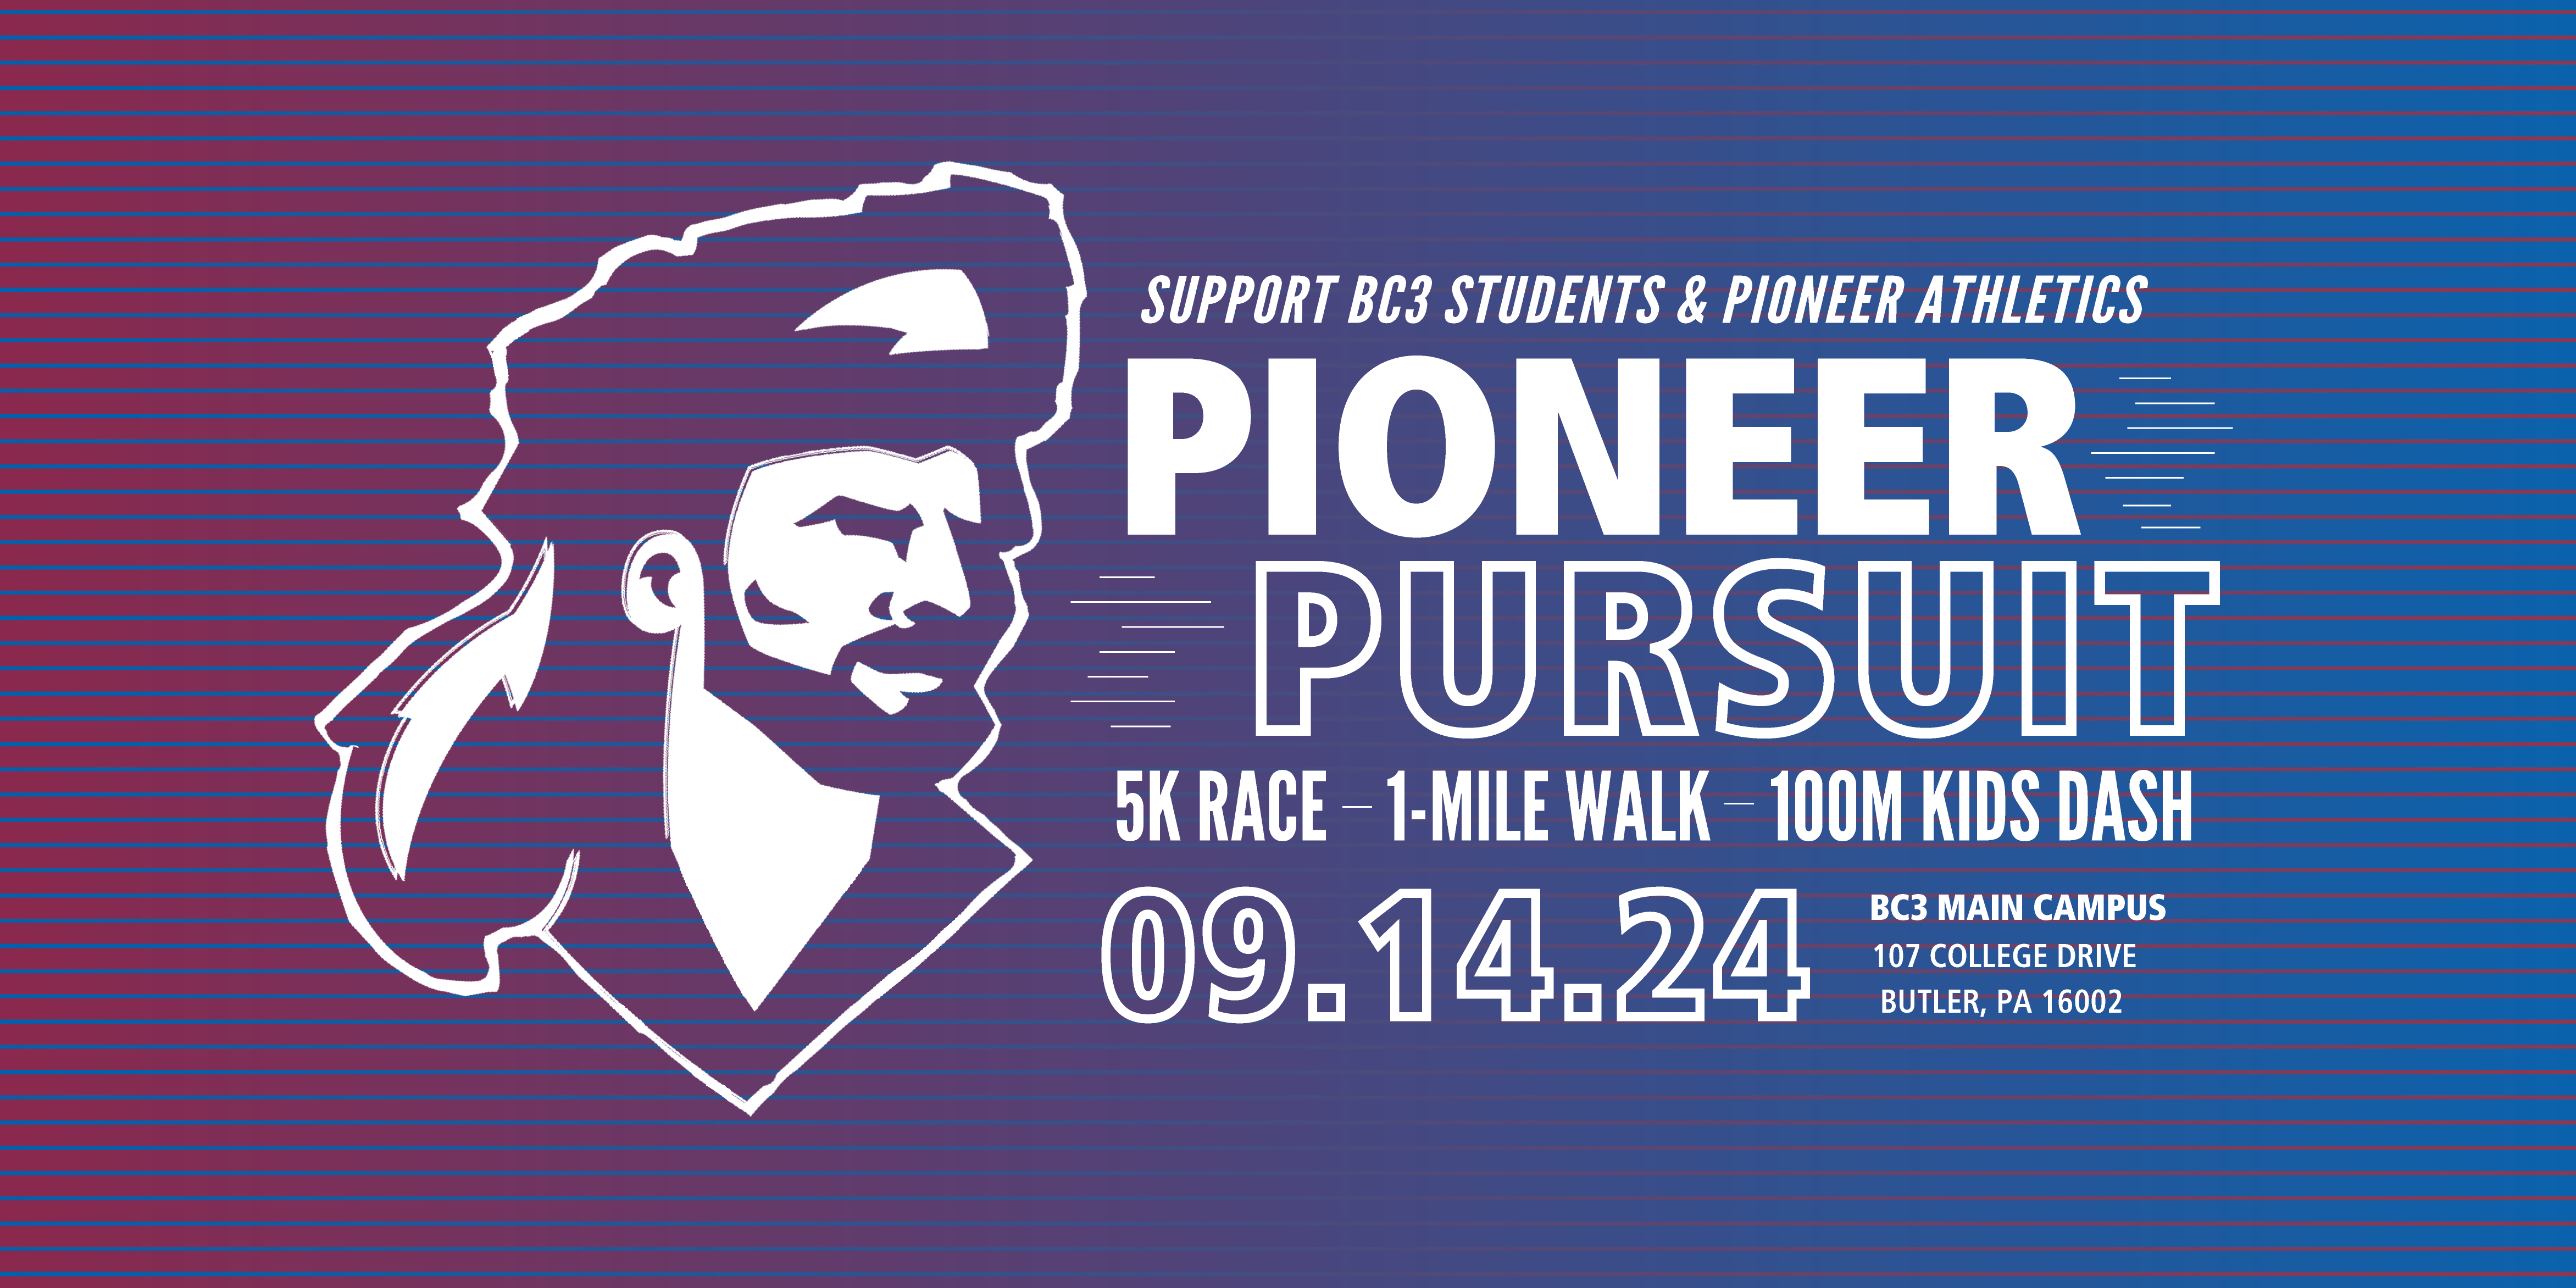 graphic banner with white pioneer head that reads "Pioneer Pursuit Support BC3 Students & Pioneer Athletics 5K Race 1-mile walk 100m Kids Dash 09.14.24 BC3 Main Campus 107 College Drive Butler, PA 16002